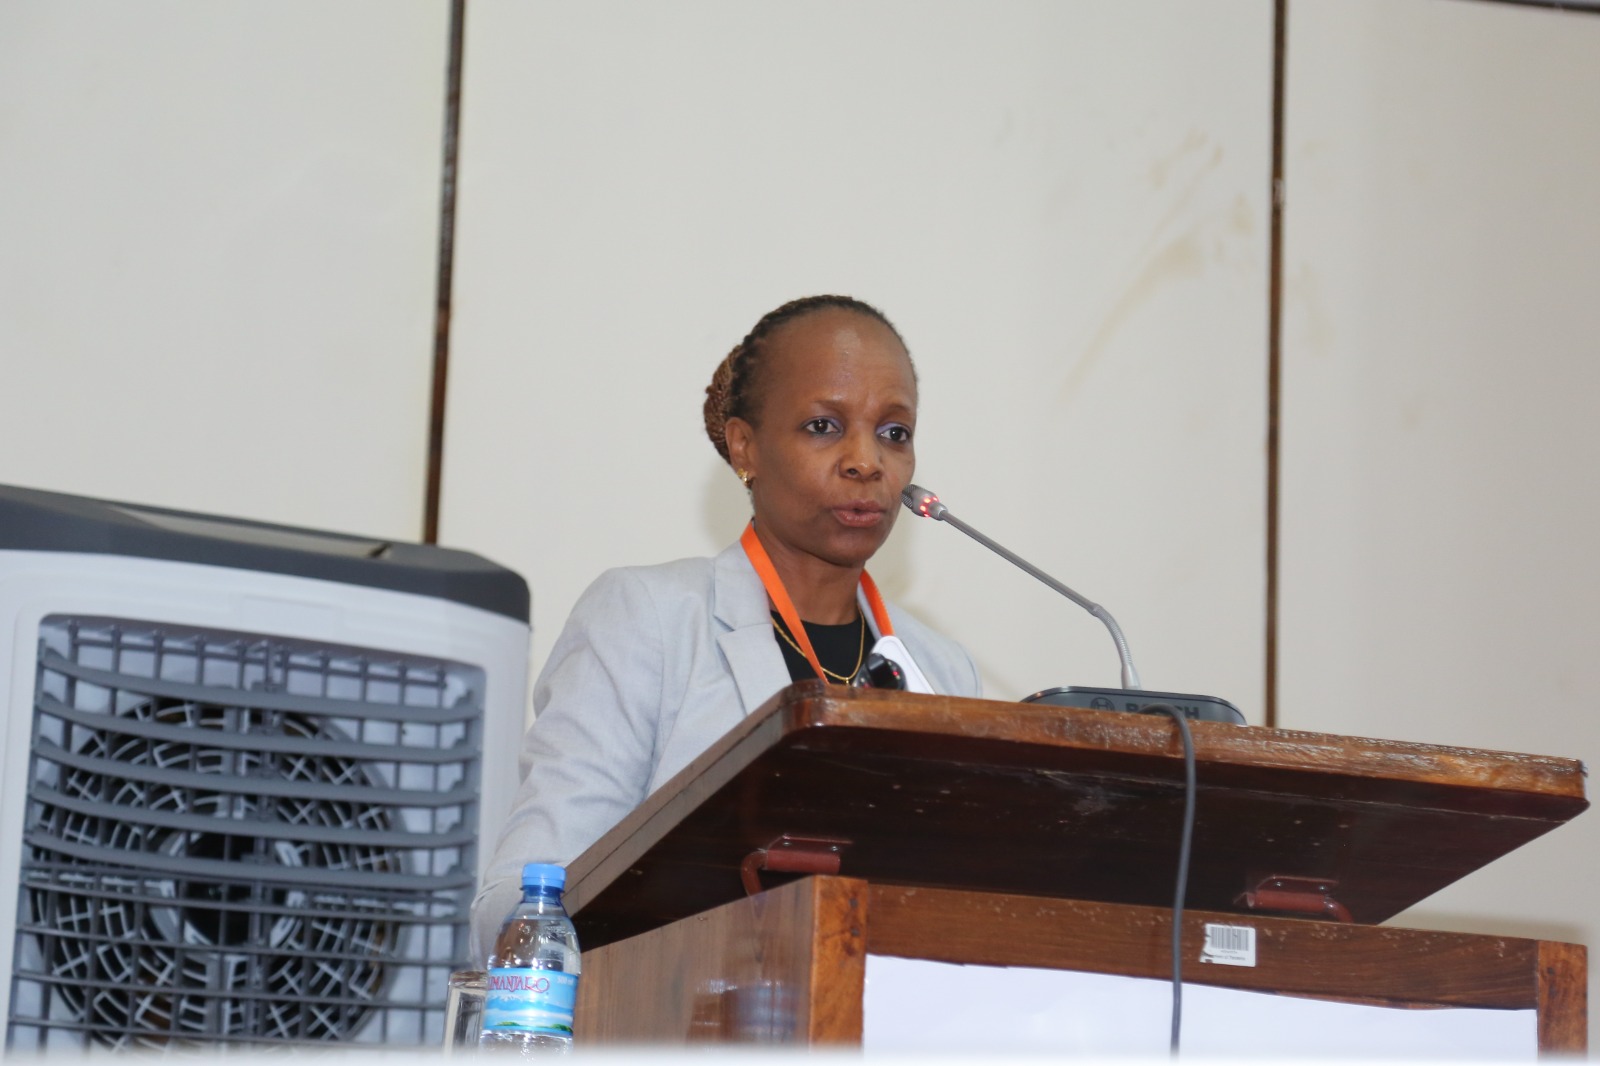 Martha Makoi, the Local Content & Capacity Building Lead at EACOP, provided valuable insights into local content and capacity building during the meeting, further strengthening the collaborative efforts between EACOP and the Parliament